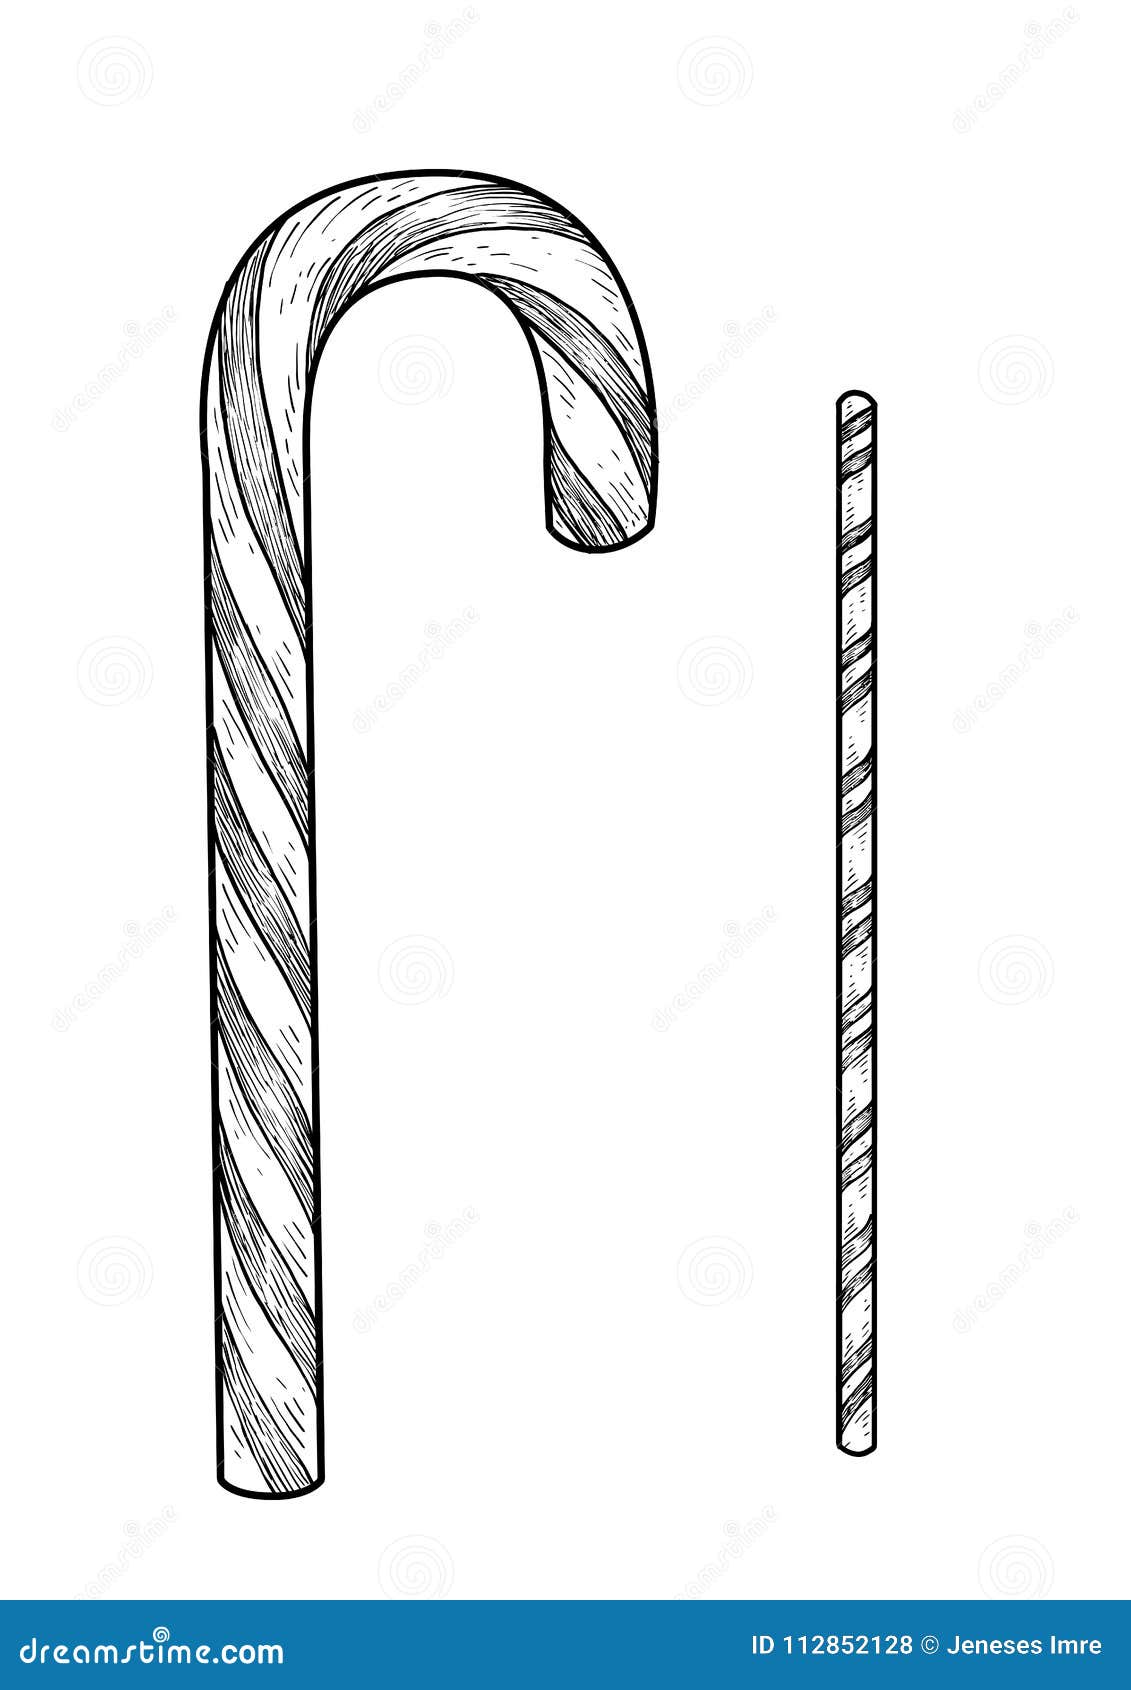 Candy cane sketch. Doodle style candy cane vector illustration. | CanStock